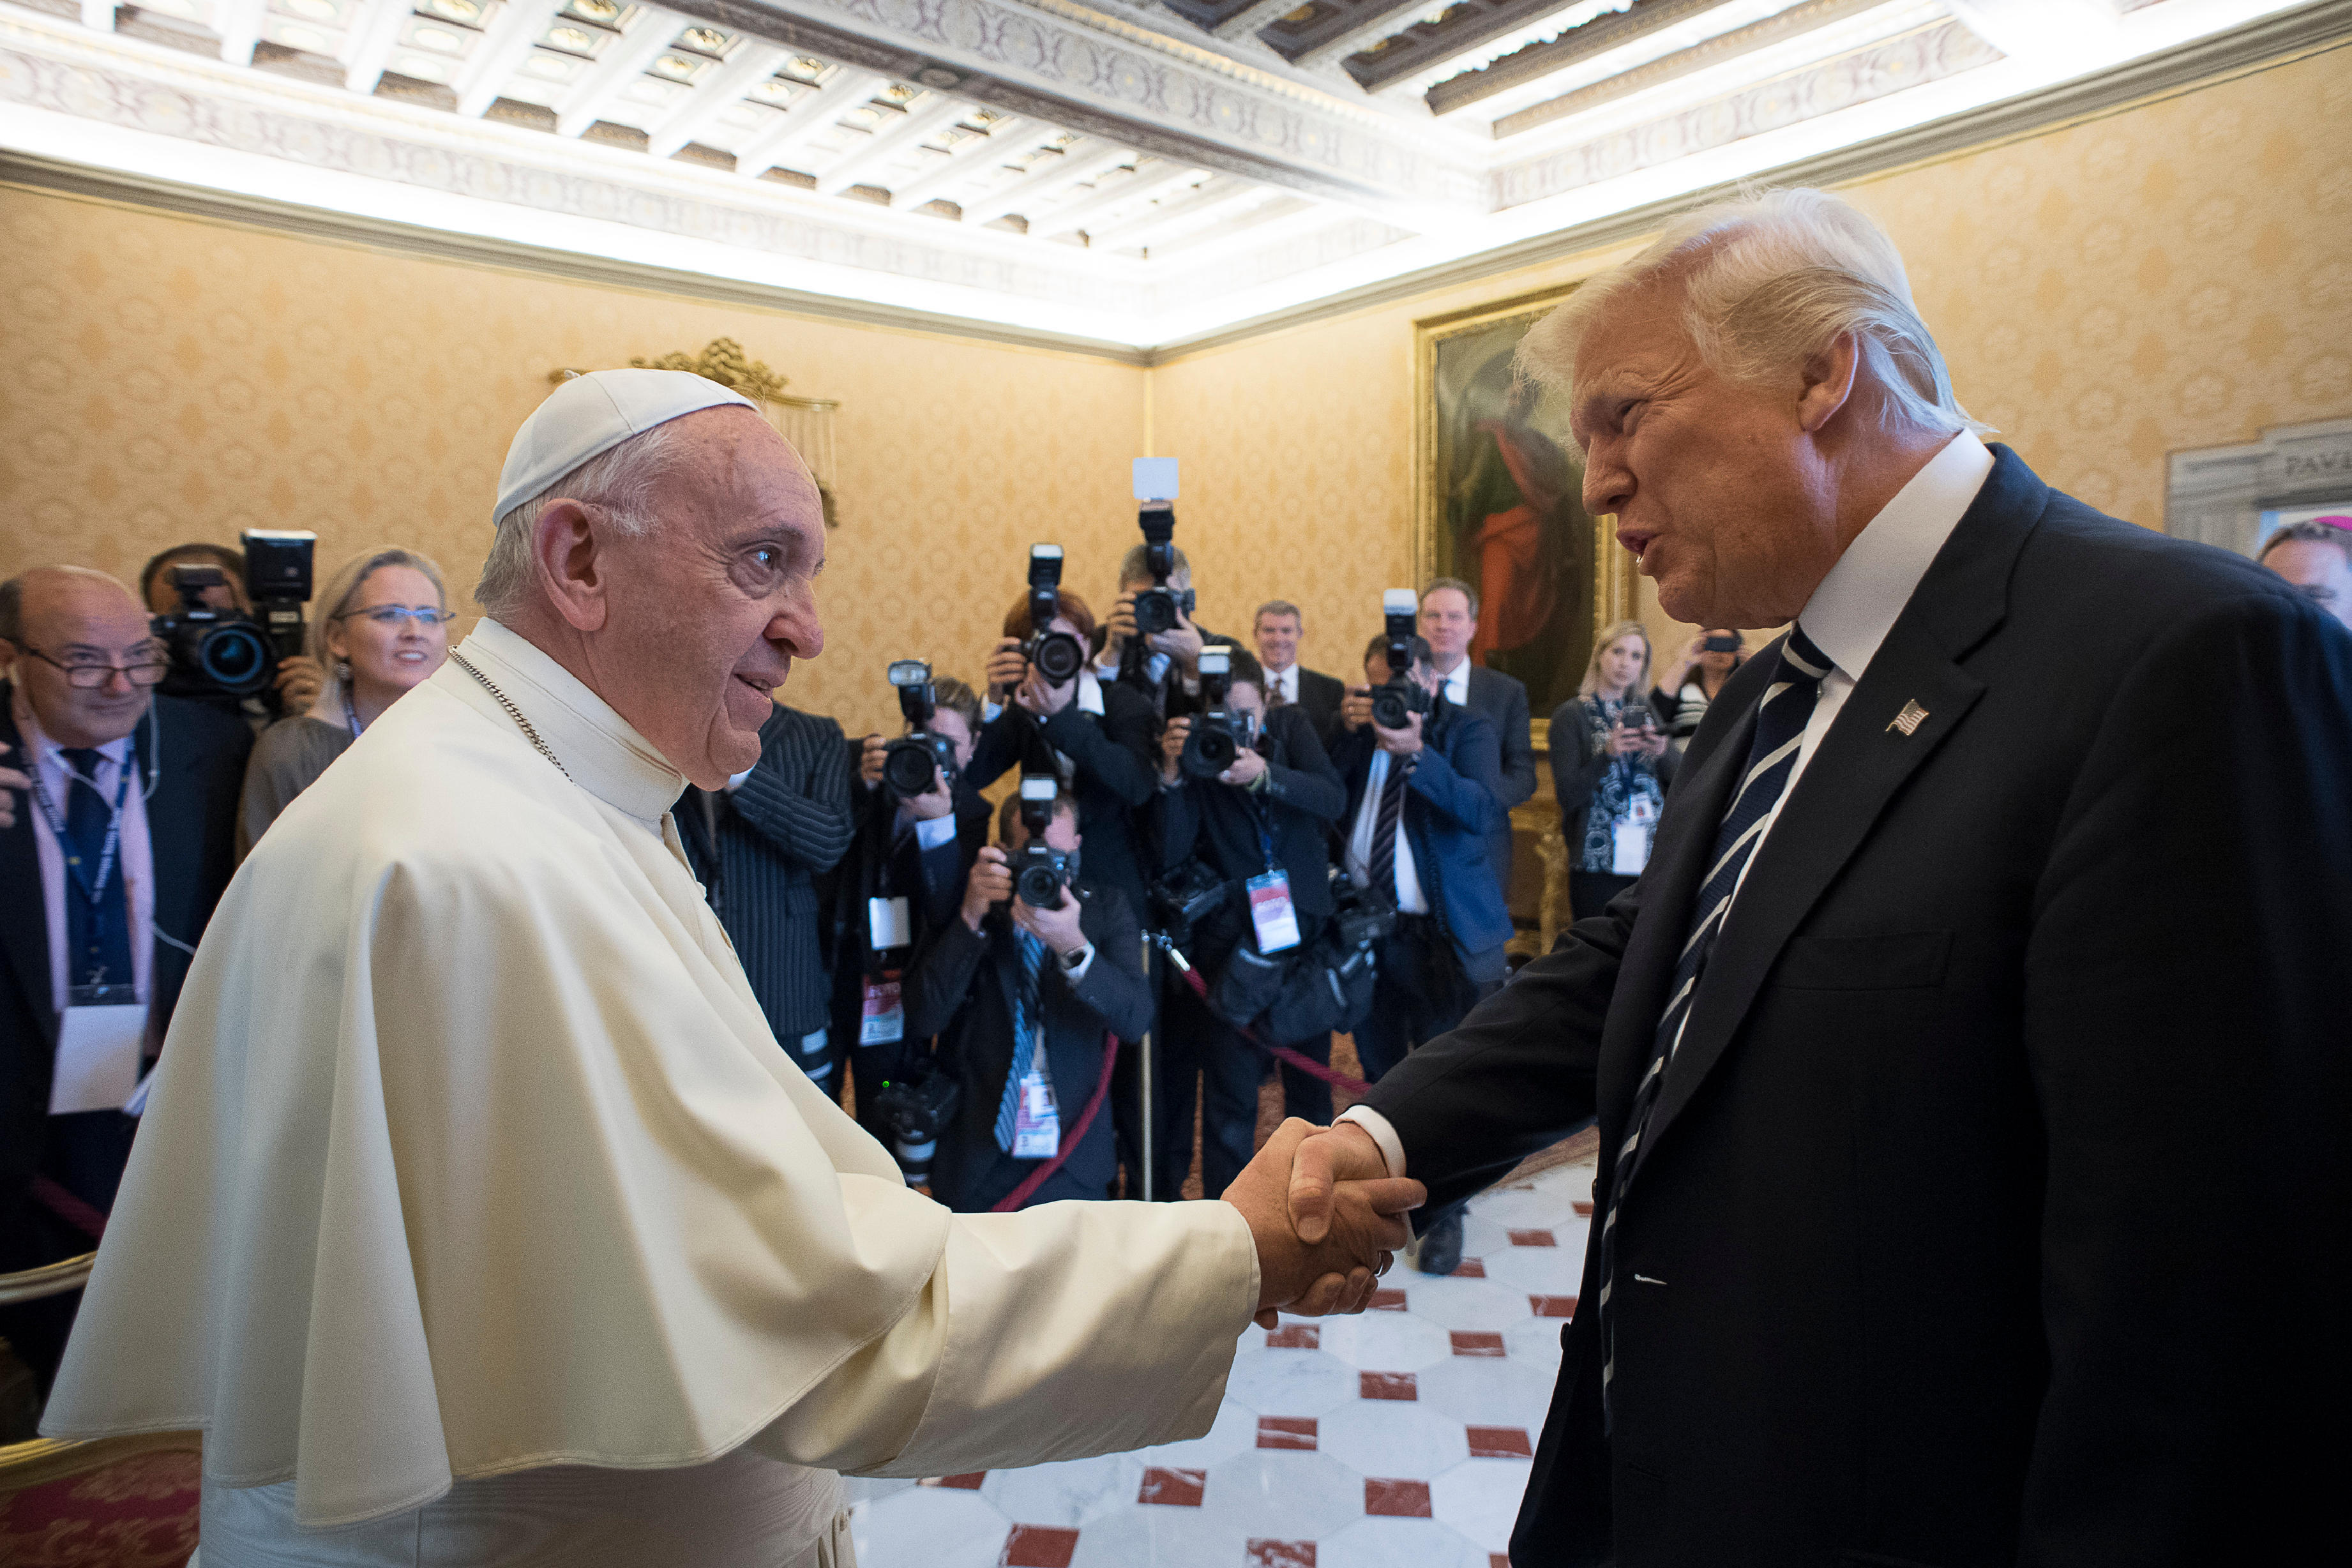 Pope Francis meets with President Trump on the occasion of their private audience, at the Vatican, Wednesday, May 24, 2017.